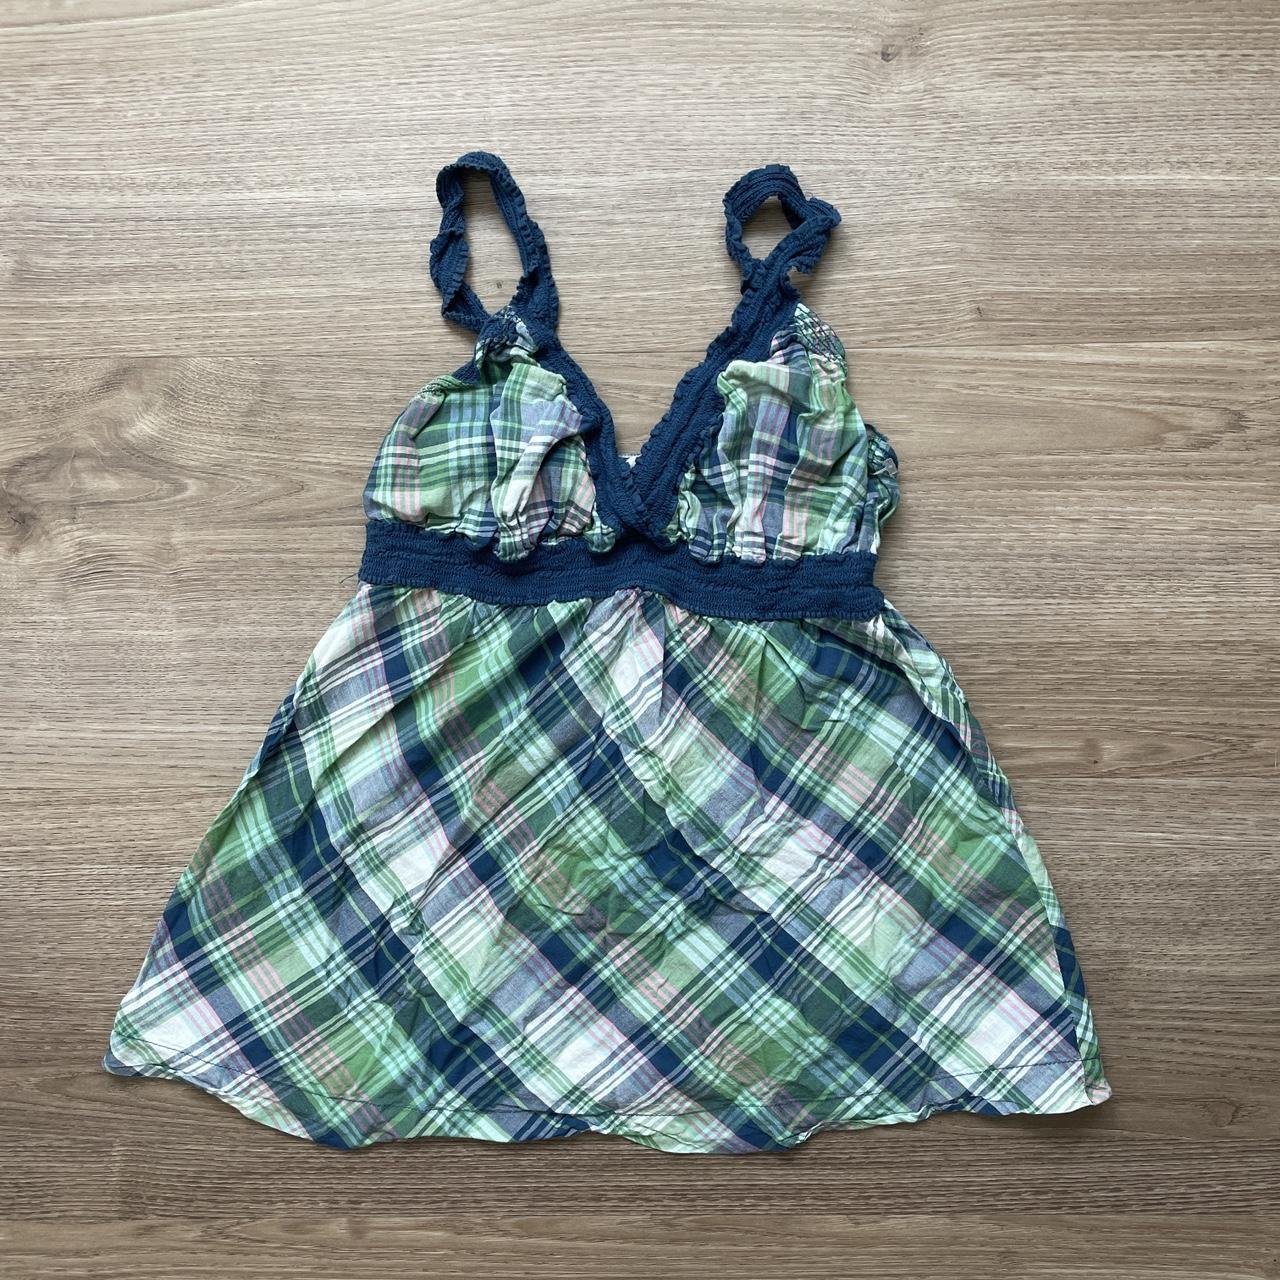 Aeropostale plaid tank top size small perfect for... - Depop